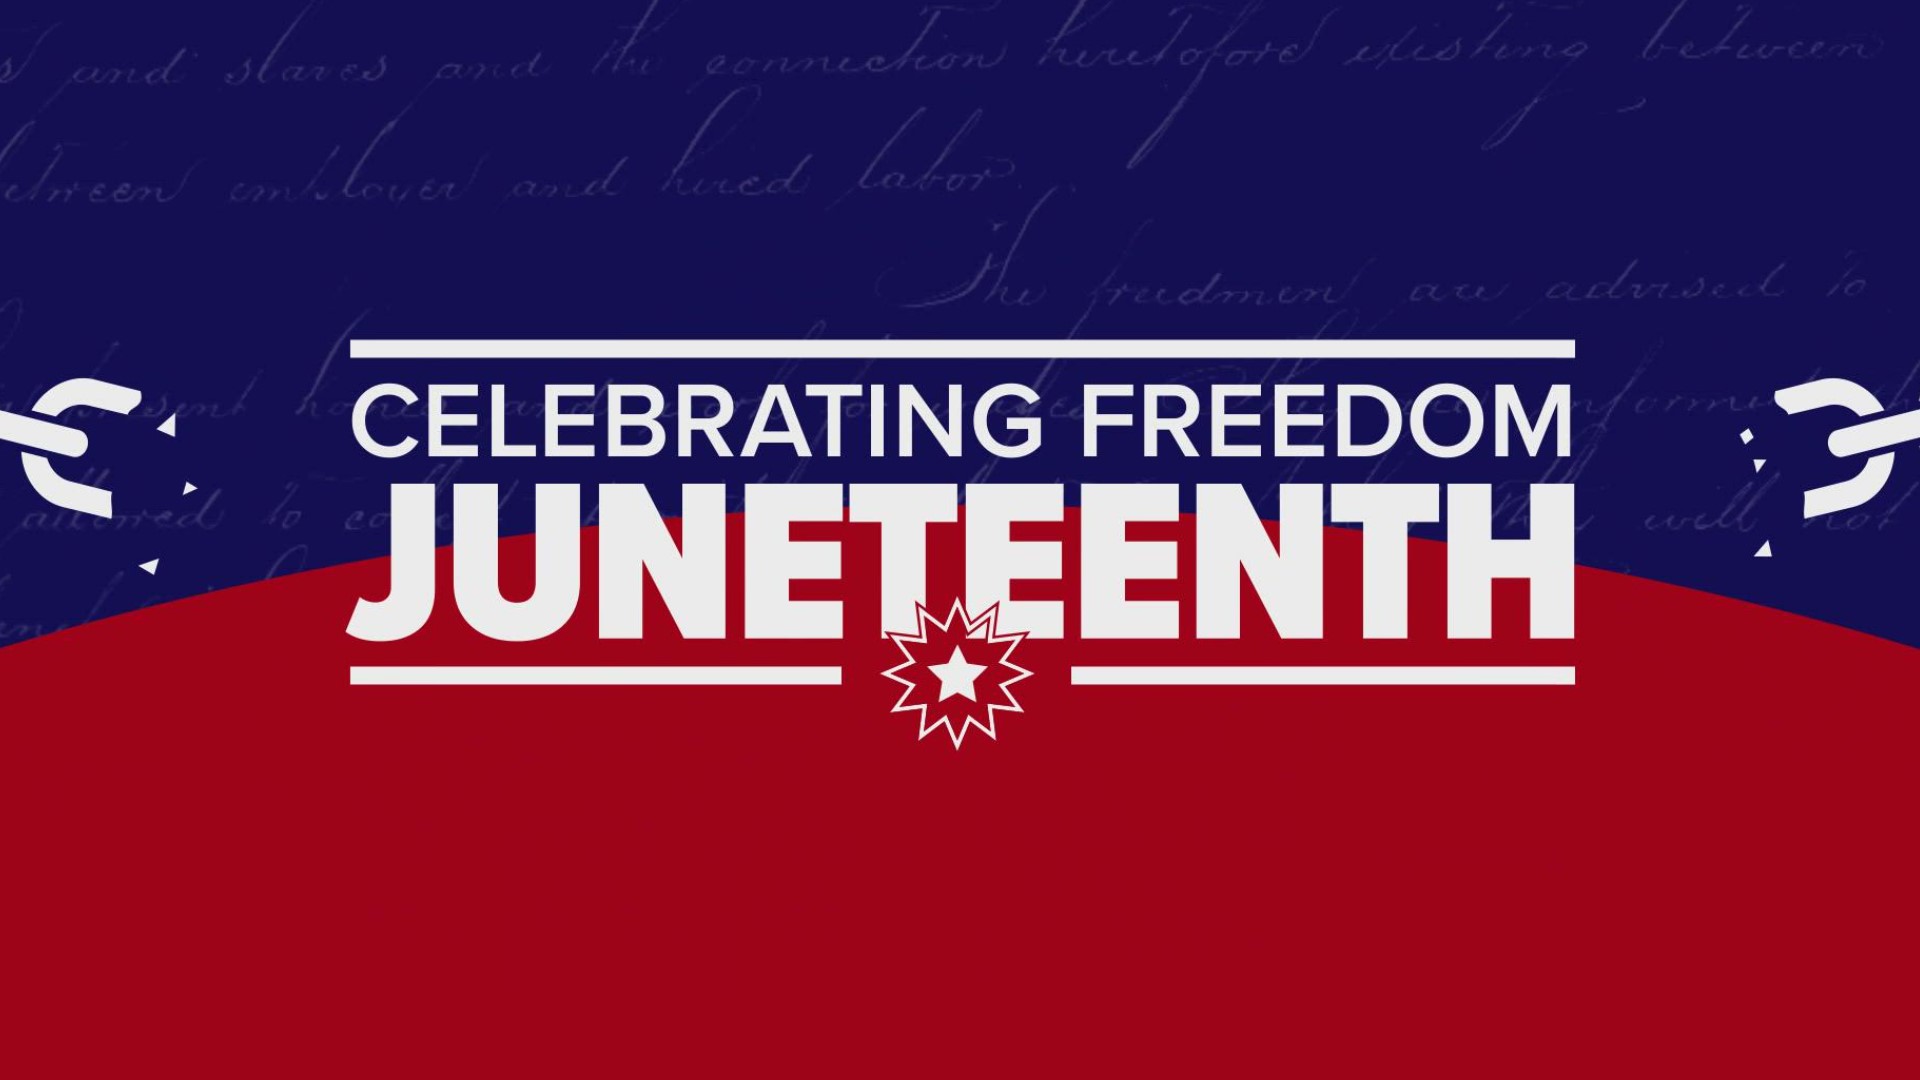 Juneteenth weekend is upon us and there’s plenty of celebrating going on around the St. Louis area. Here's a few different ways you can celebrate.